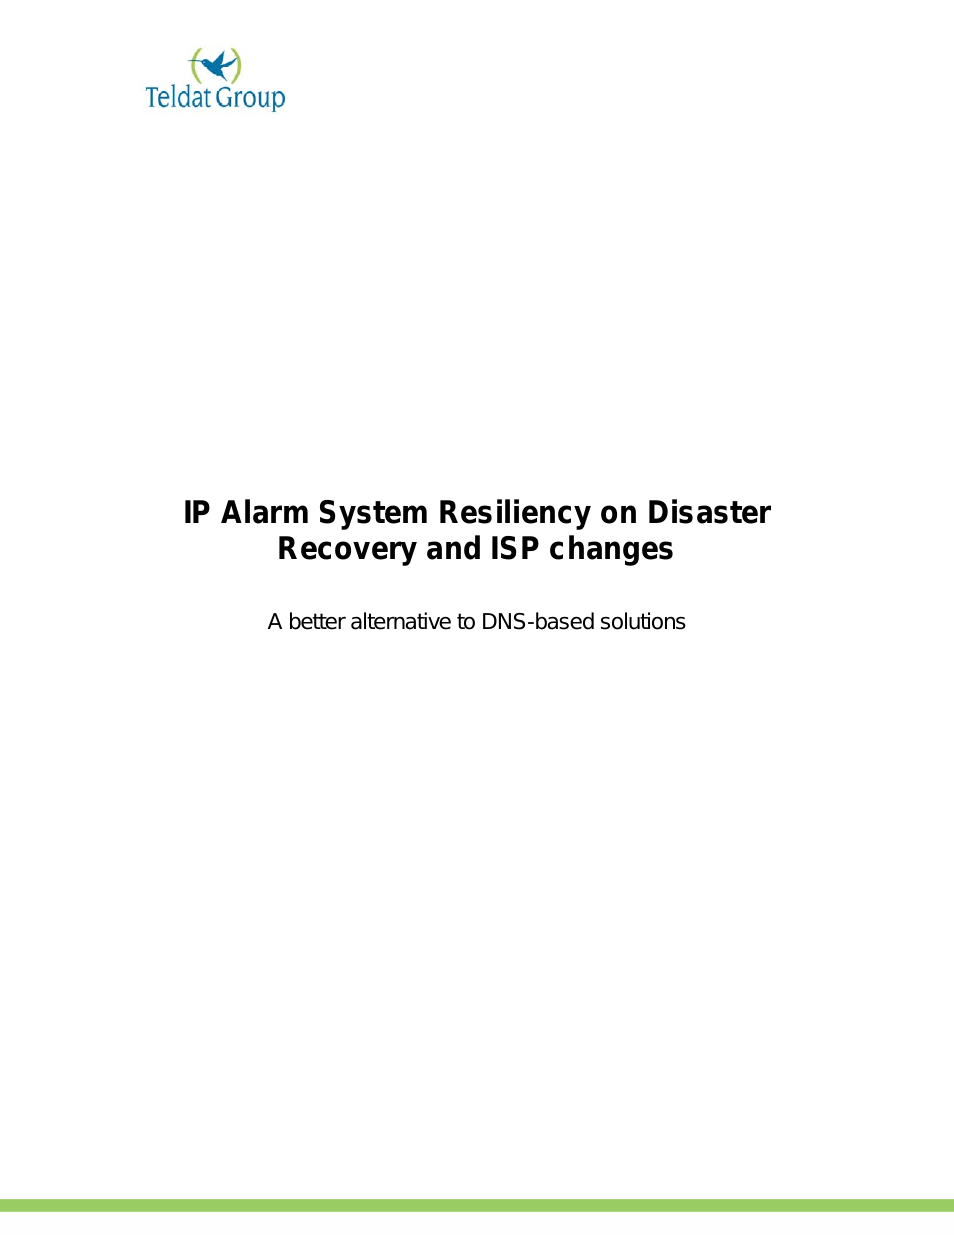 IP Alarm System Resiliency on Disaster Recovery and ISP changes